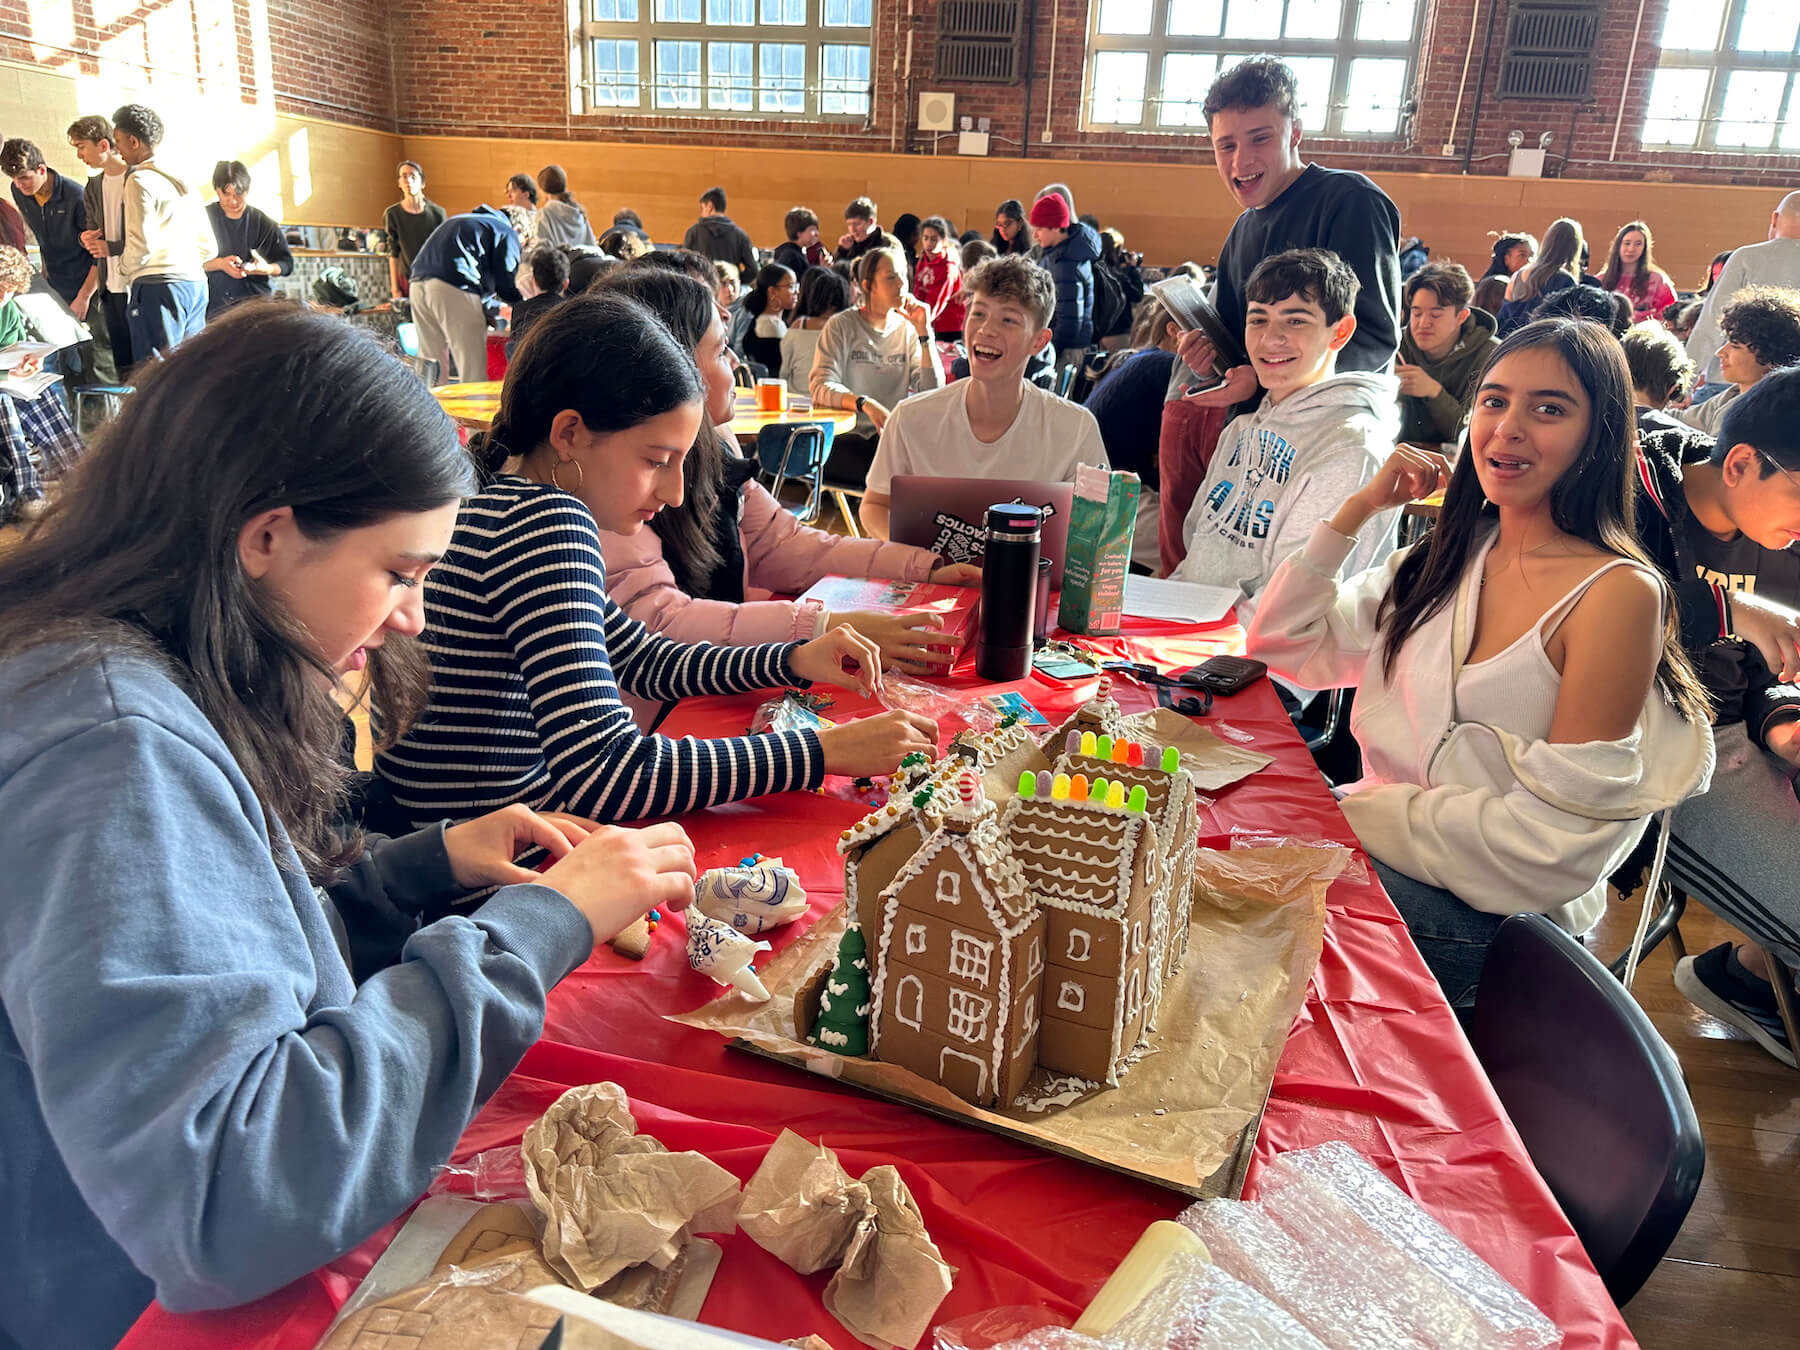 Ethical Culture Fieldston School students working together to build gingerbread house